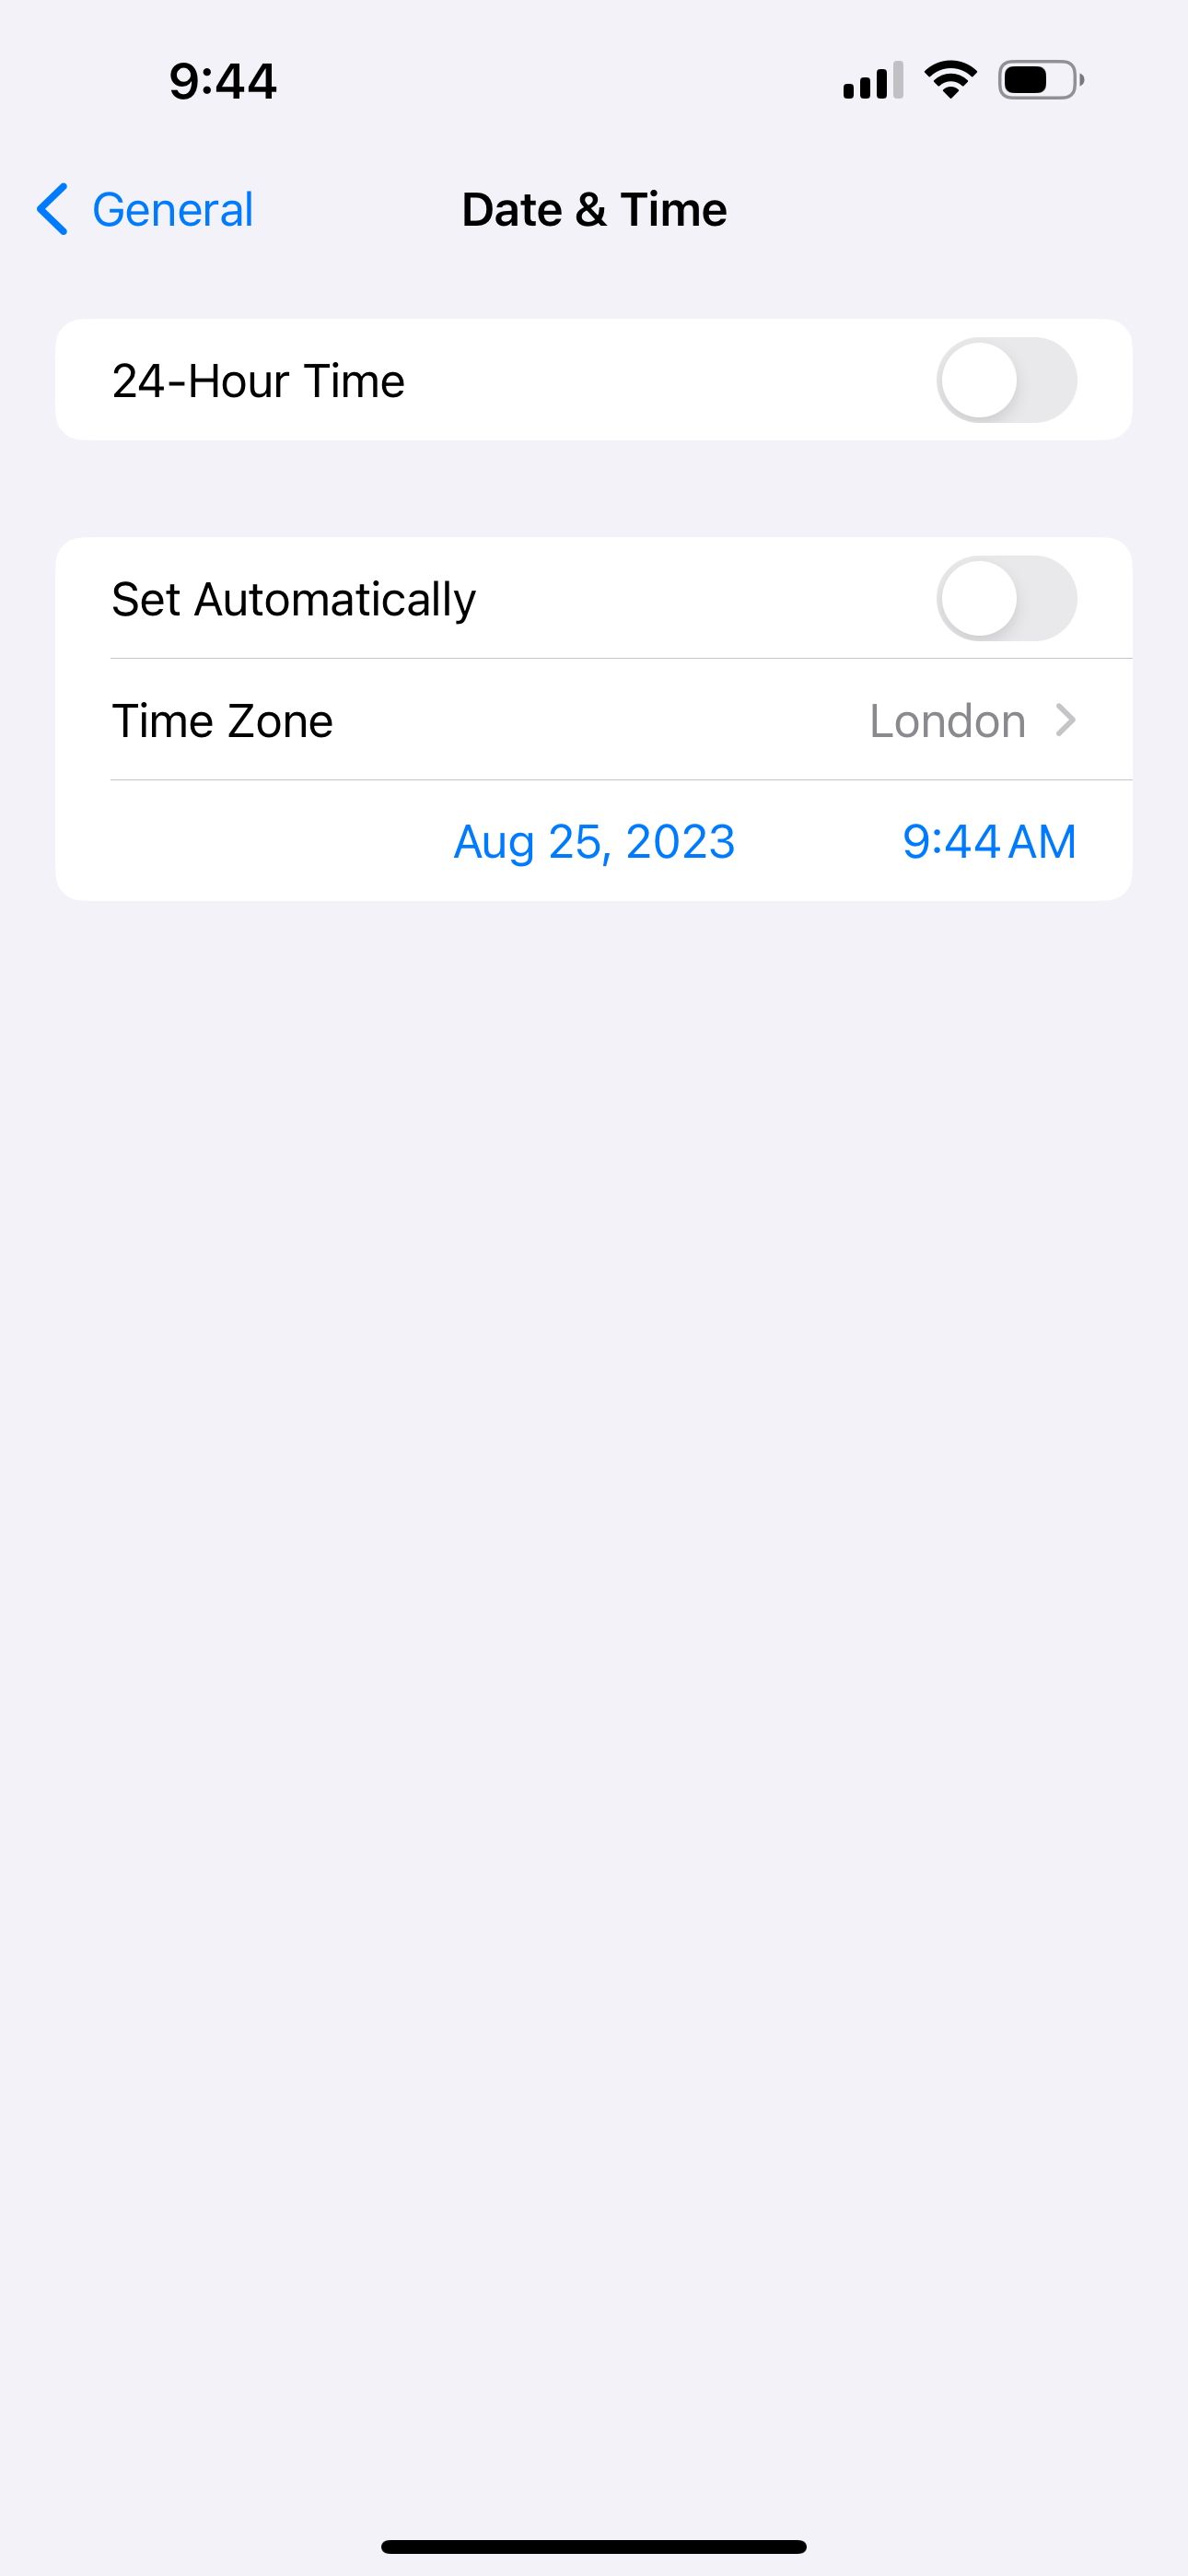 setting date and time manually in iOS